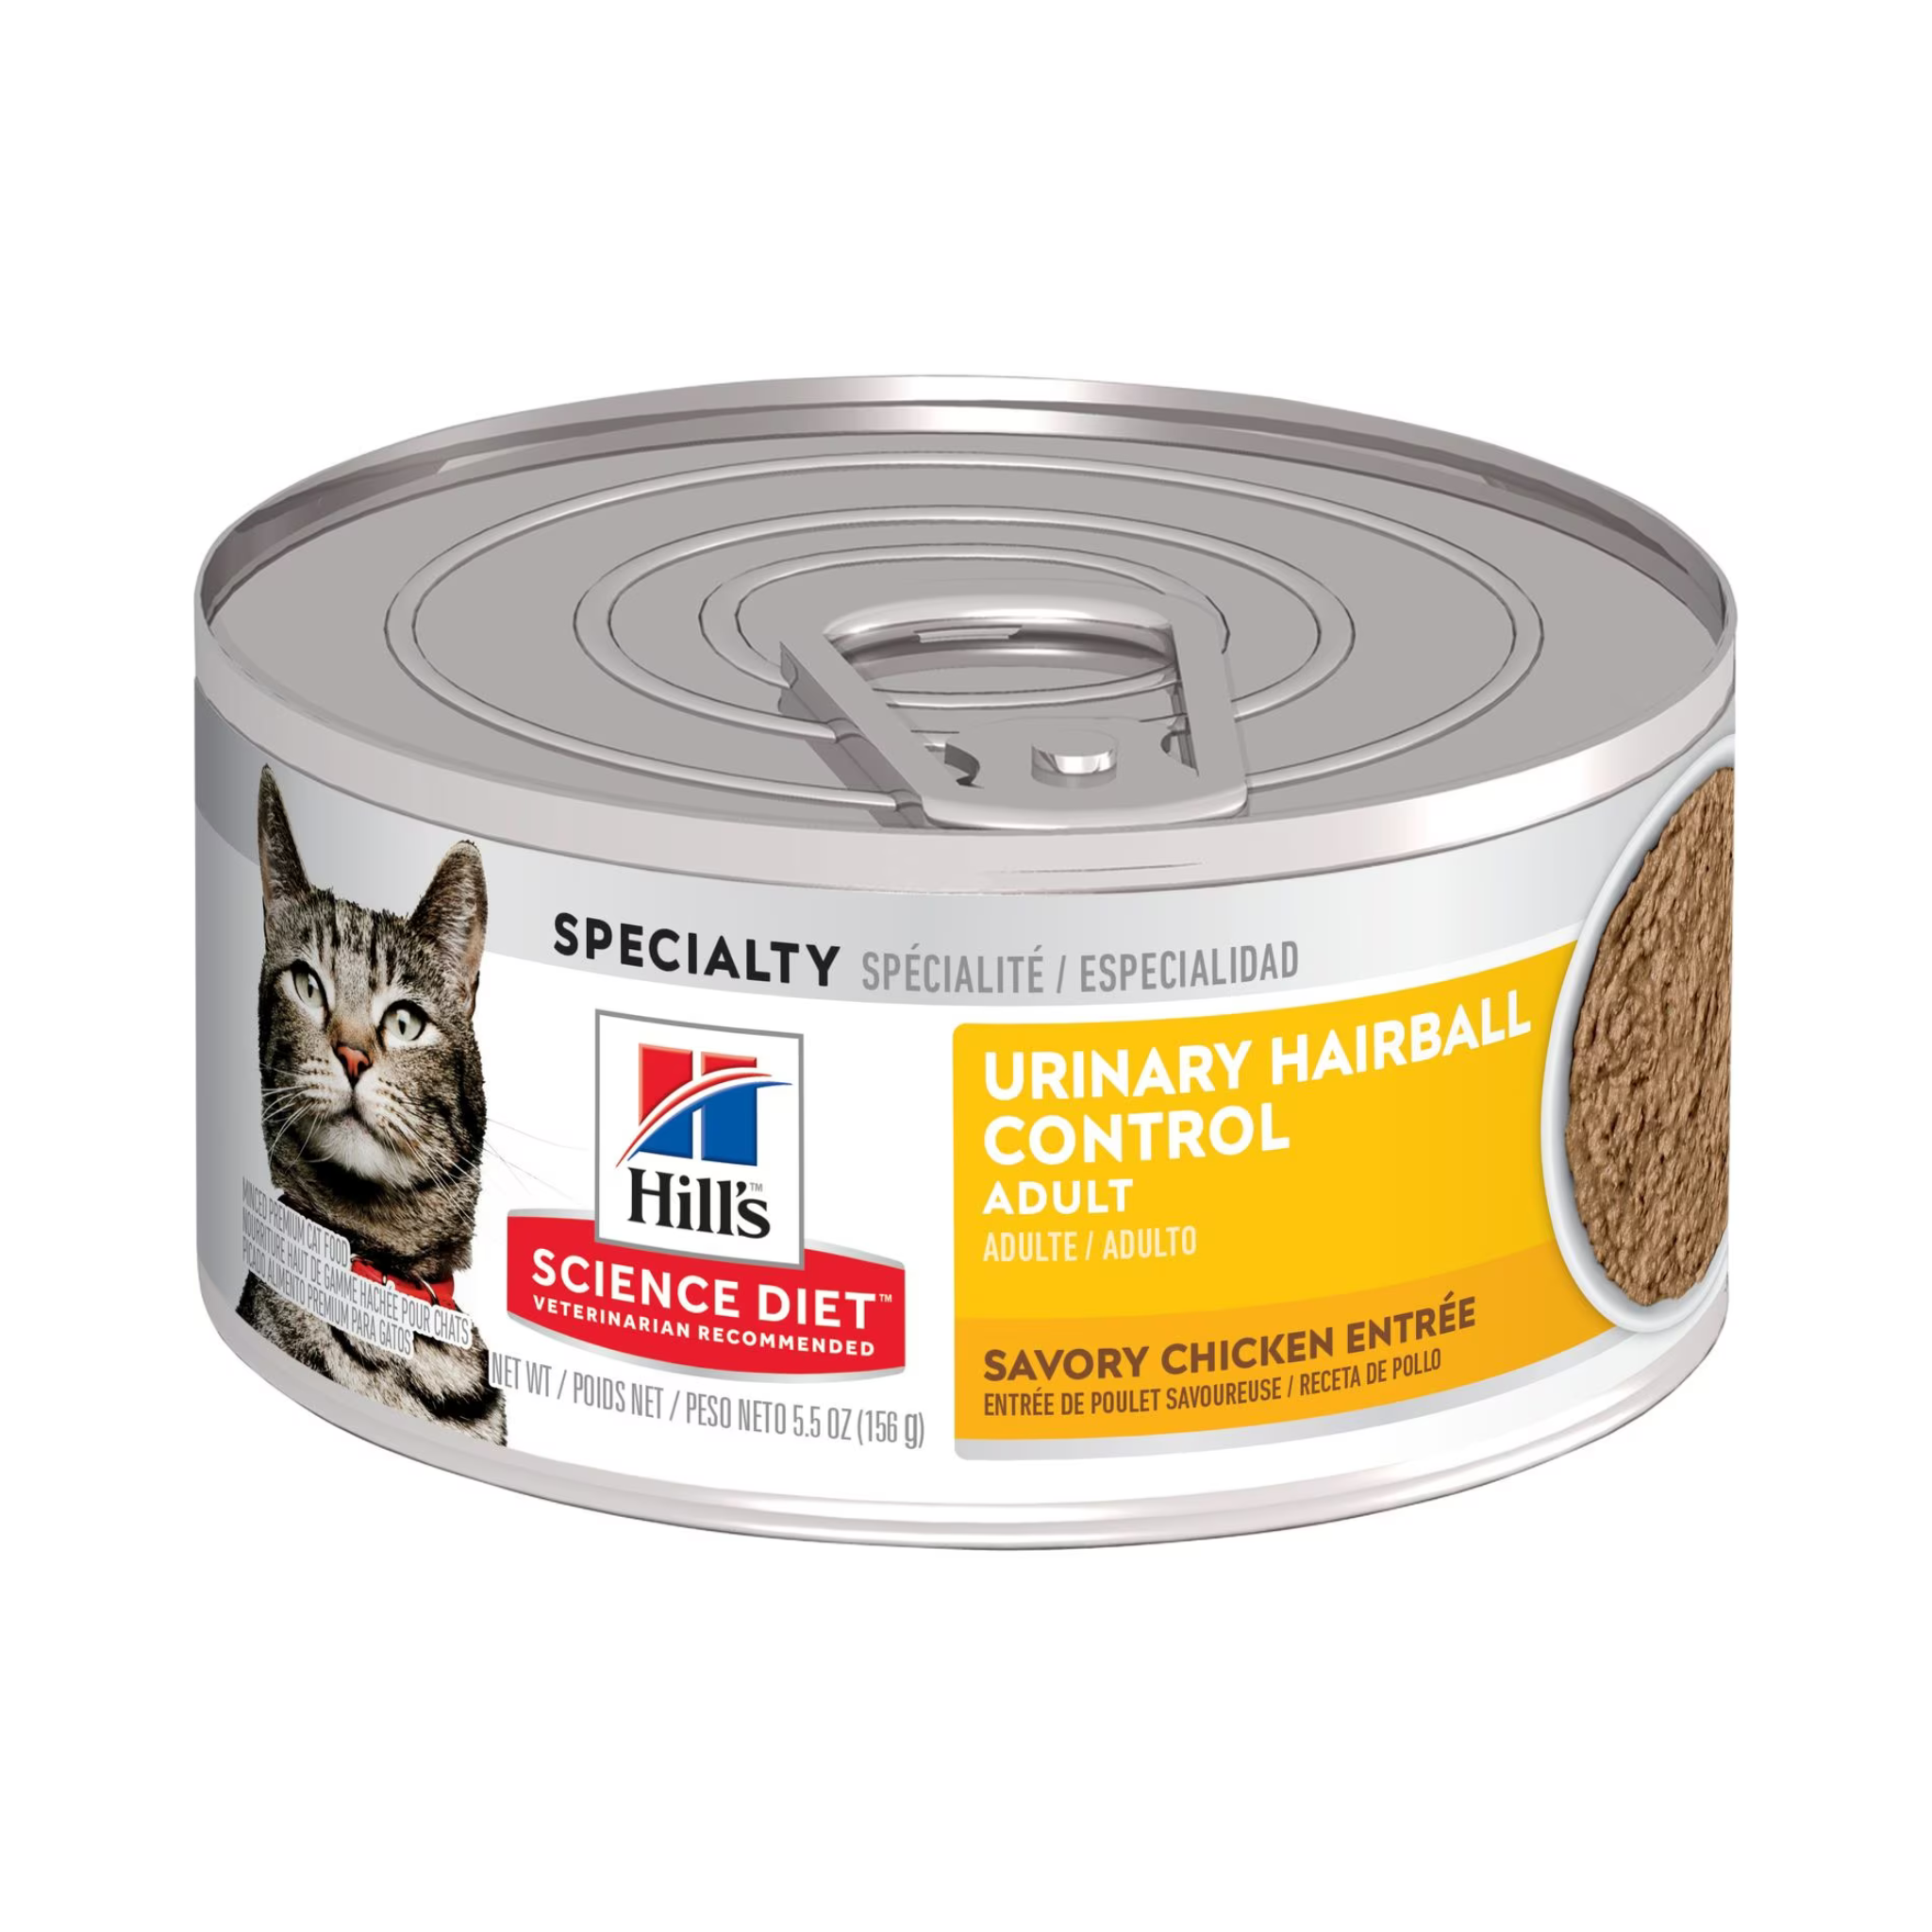 Hill's Science Diet Urinary Hairball Control Savory Chicken Entrée Adult Cat Canned